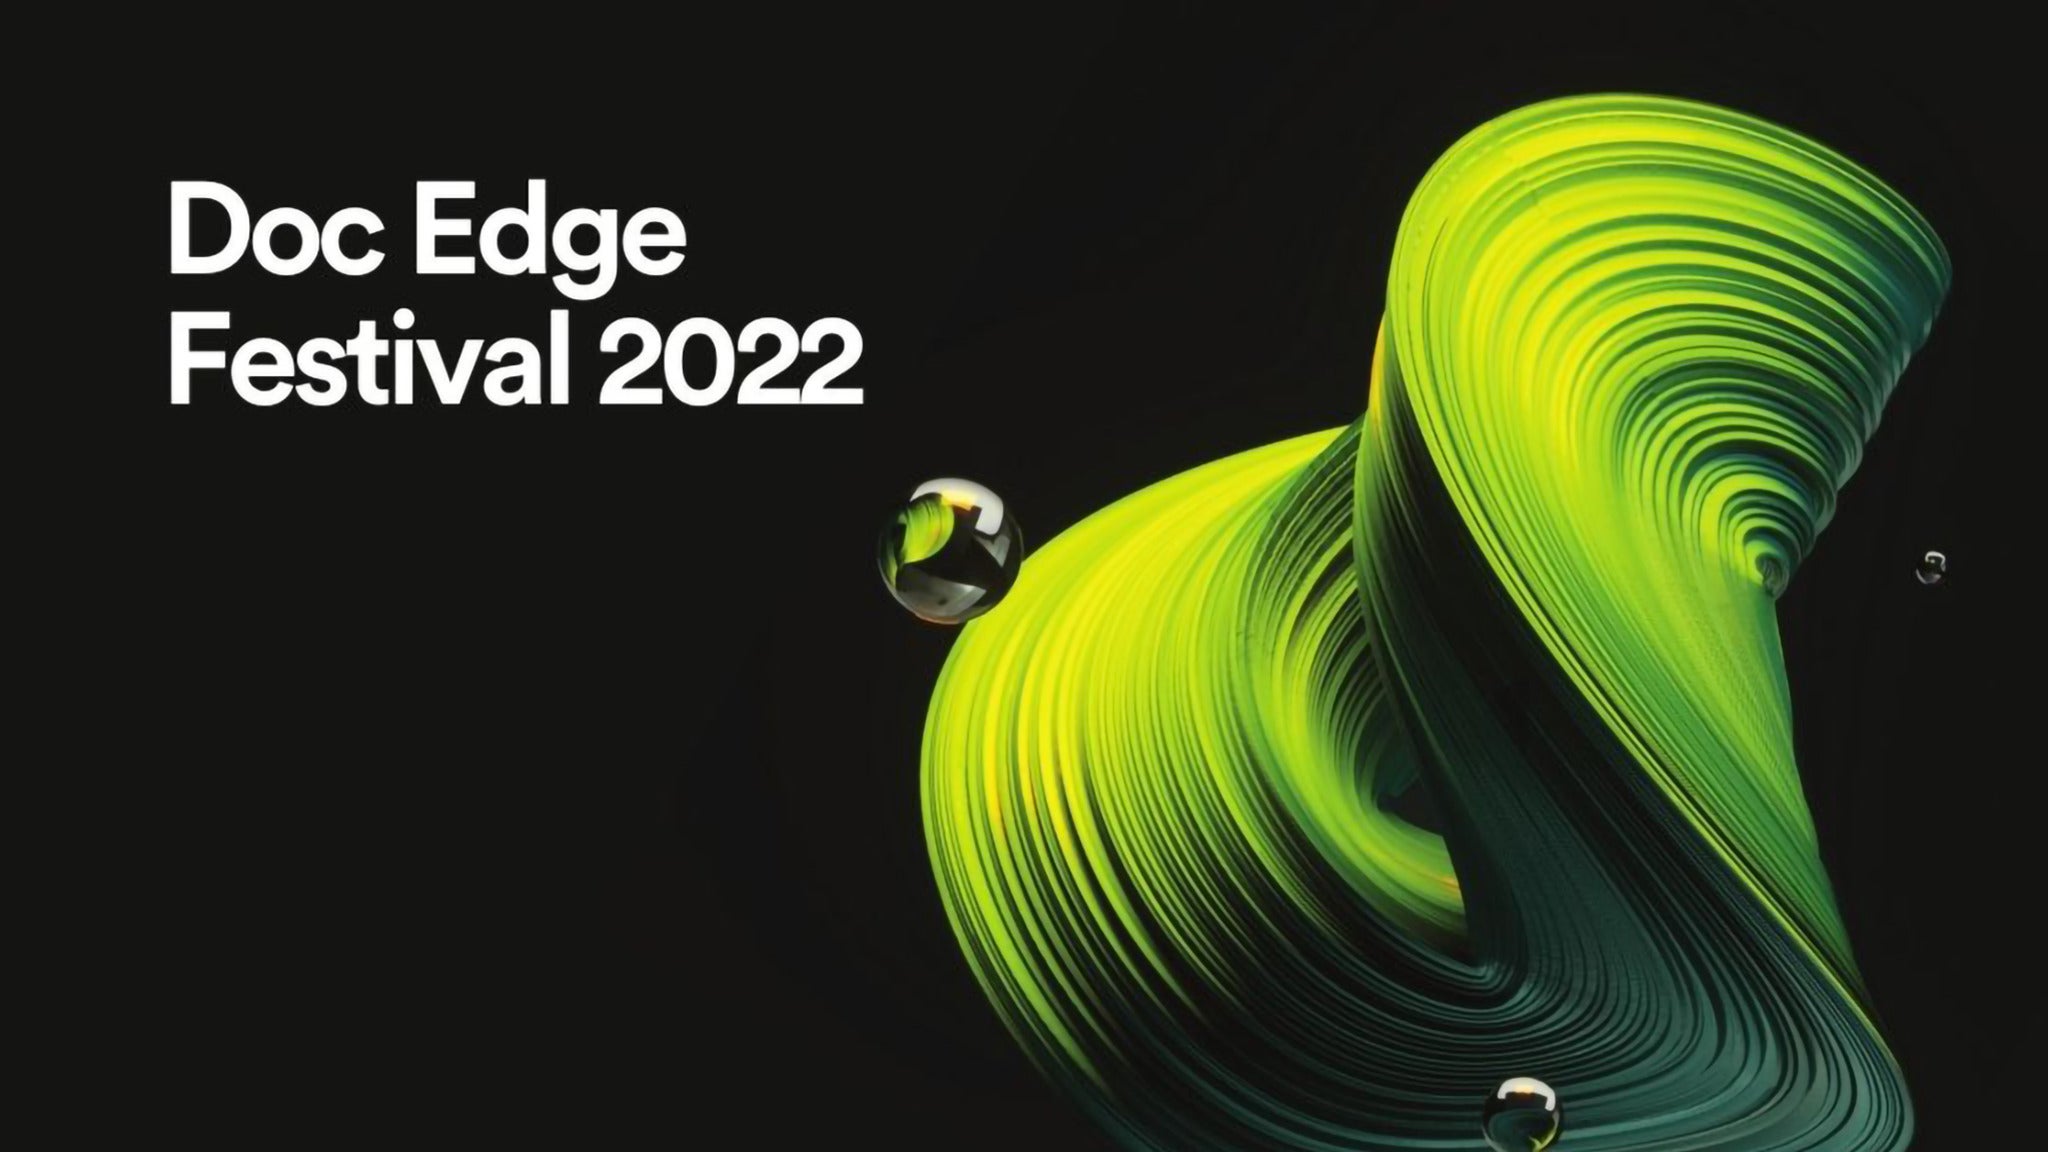 Image used with permission from Ticketmaster | Doc Edge Festival 2022: Crows Are White tickets